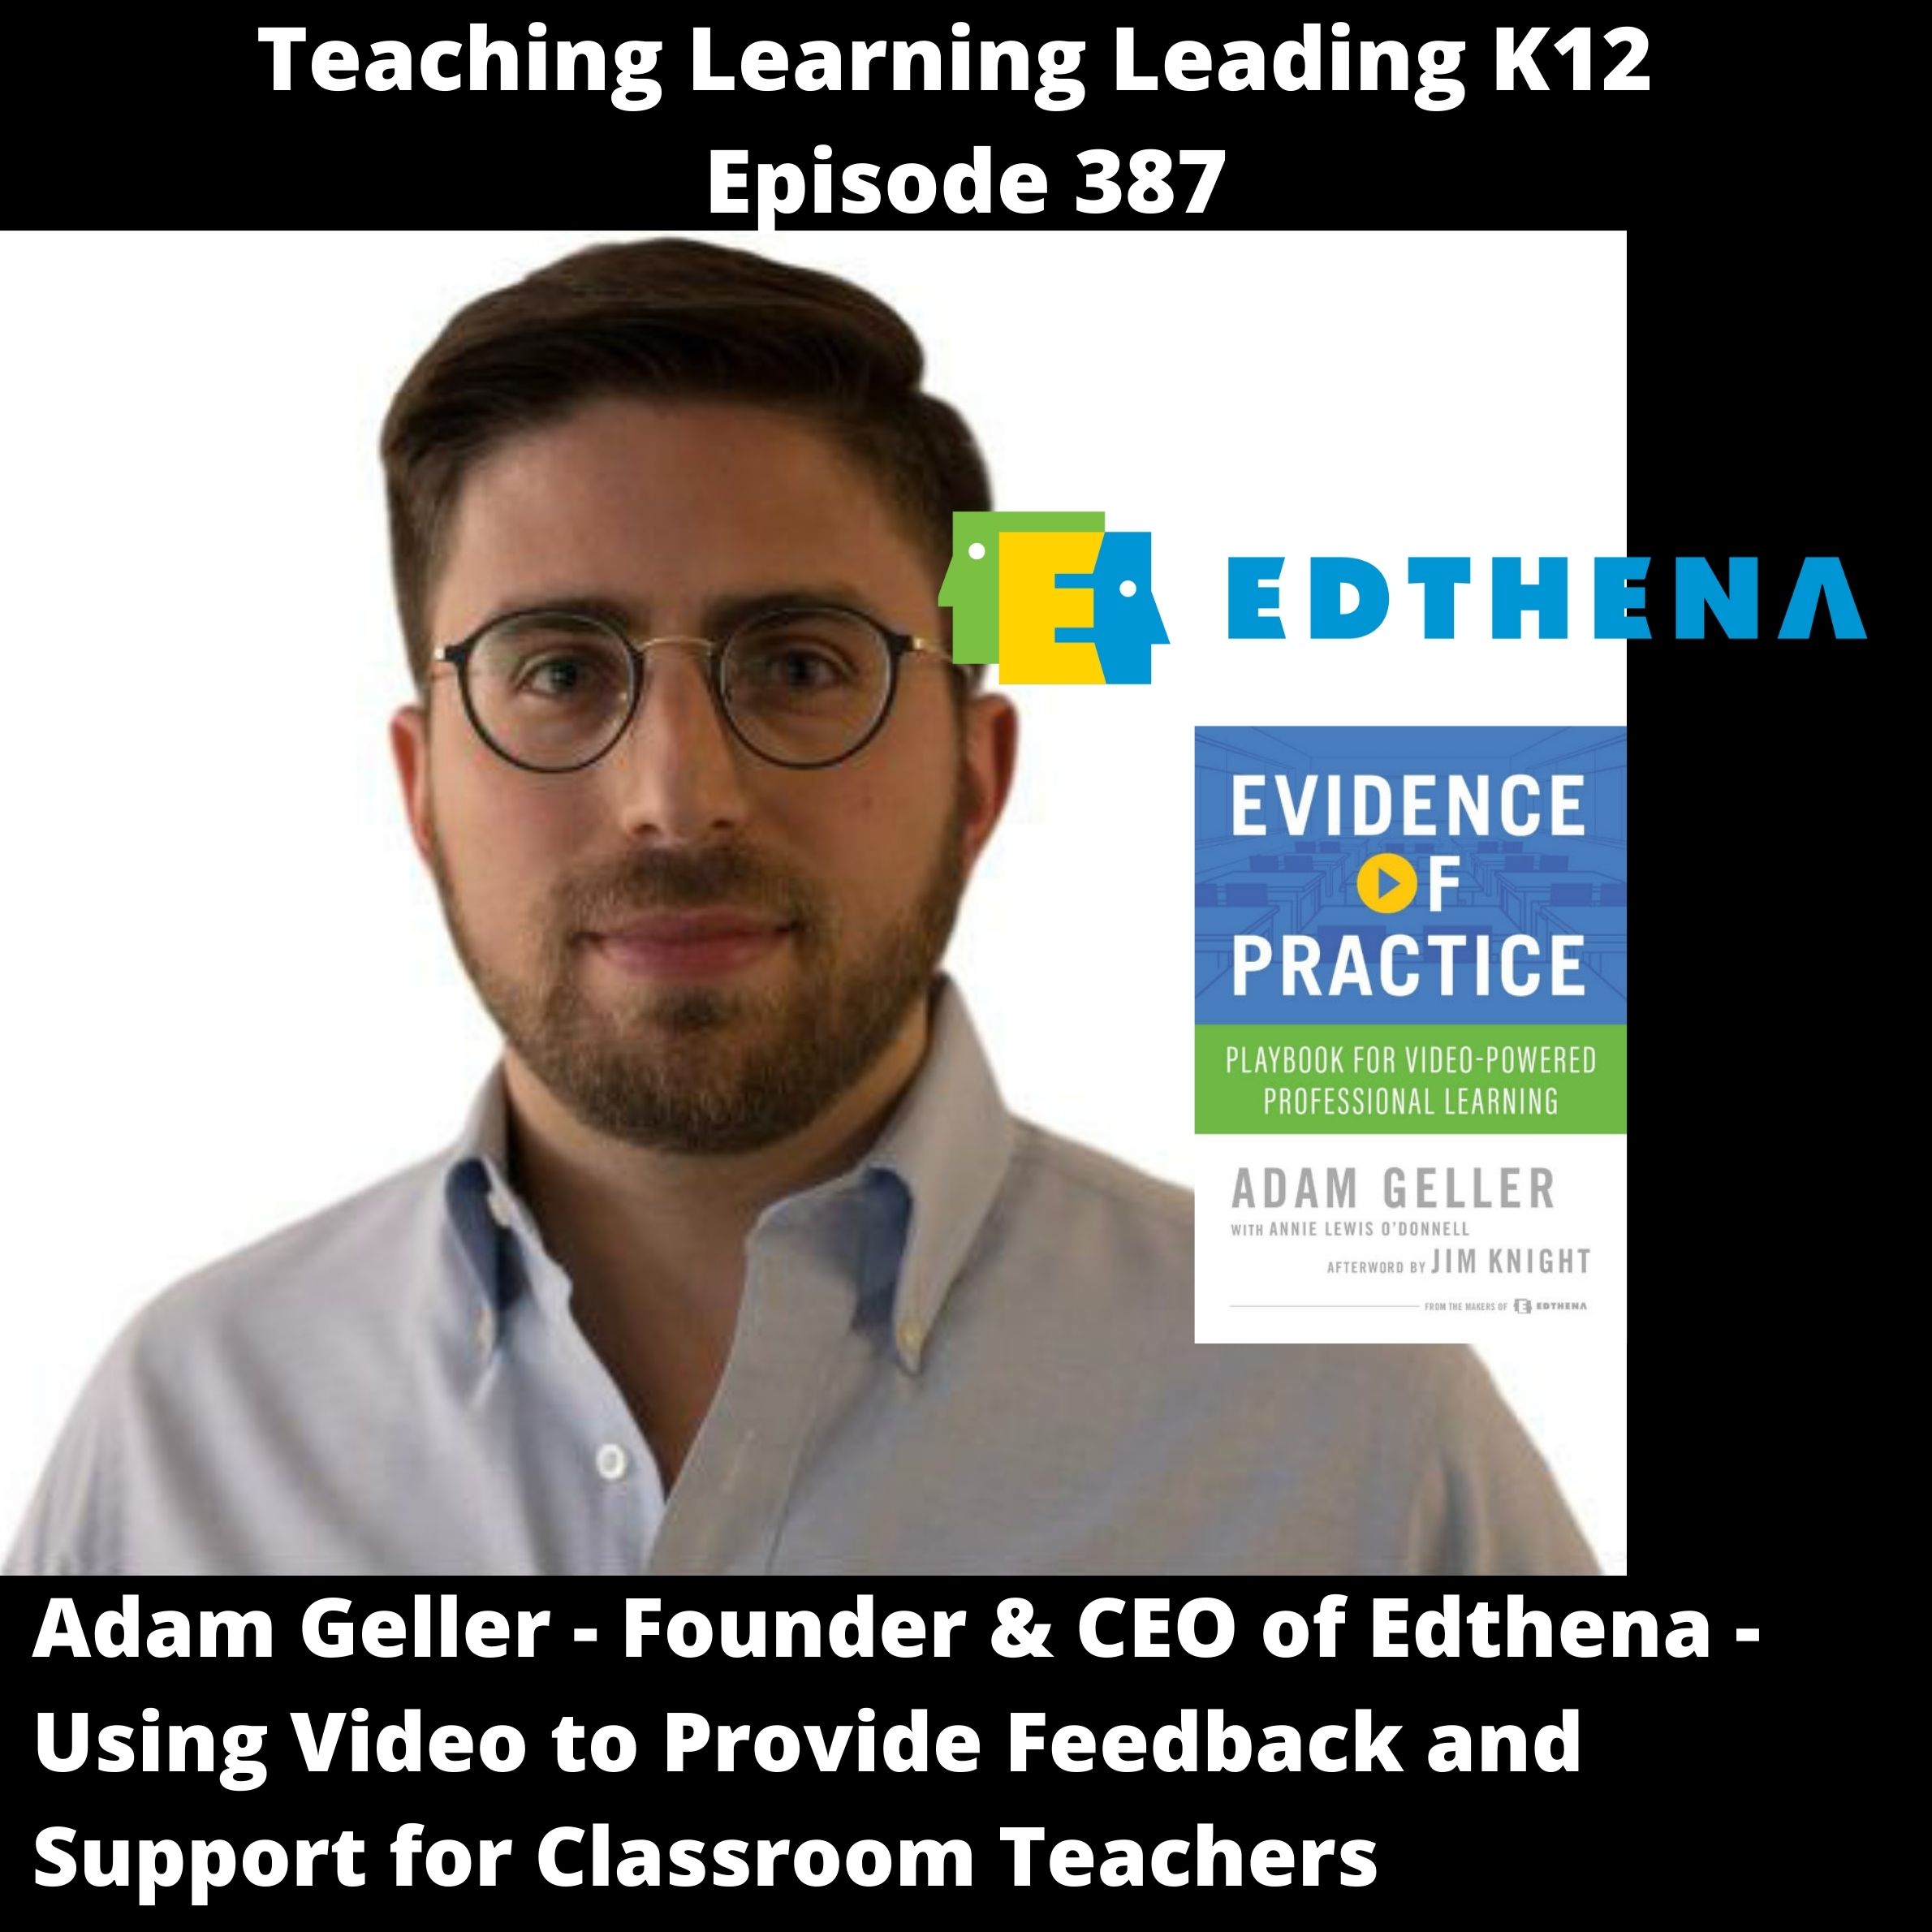 Adam Geller - Founder & CEO of Edthena - Using Video to Provide Feedback and Support for Classroom Teachers - 387 Image